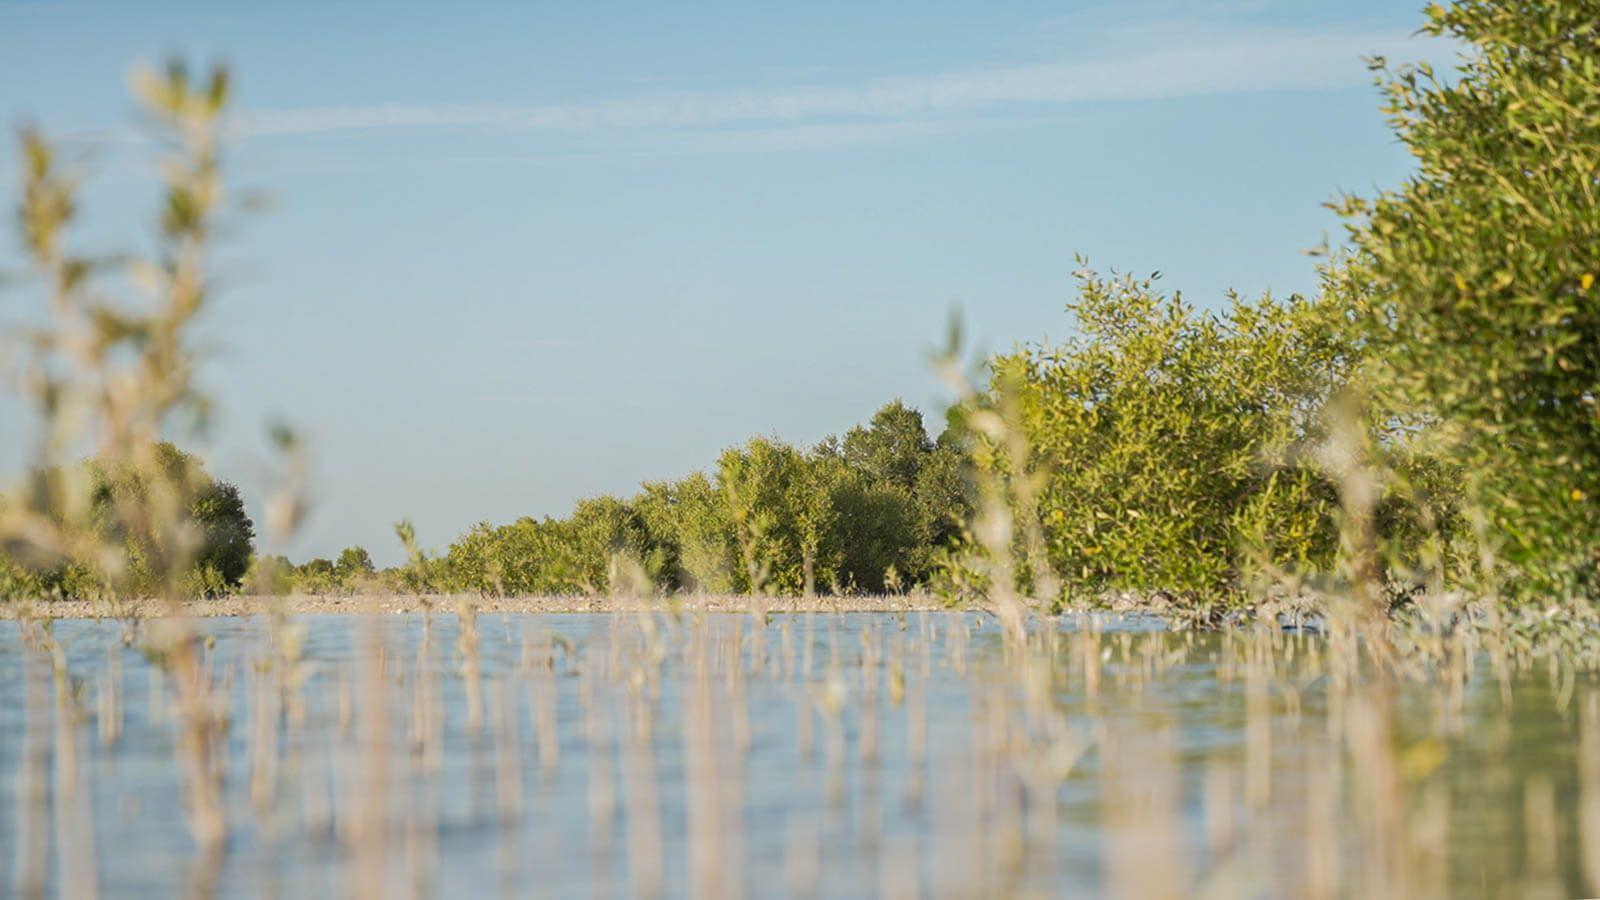 Mangroves are carbon sinks, storing nearly 10 billion tonnes of carbon around the world. Photo: The Climate Tribe.